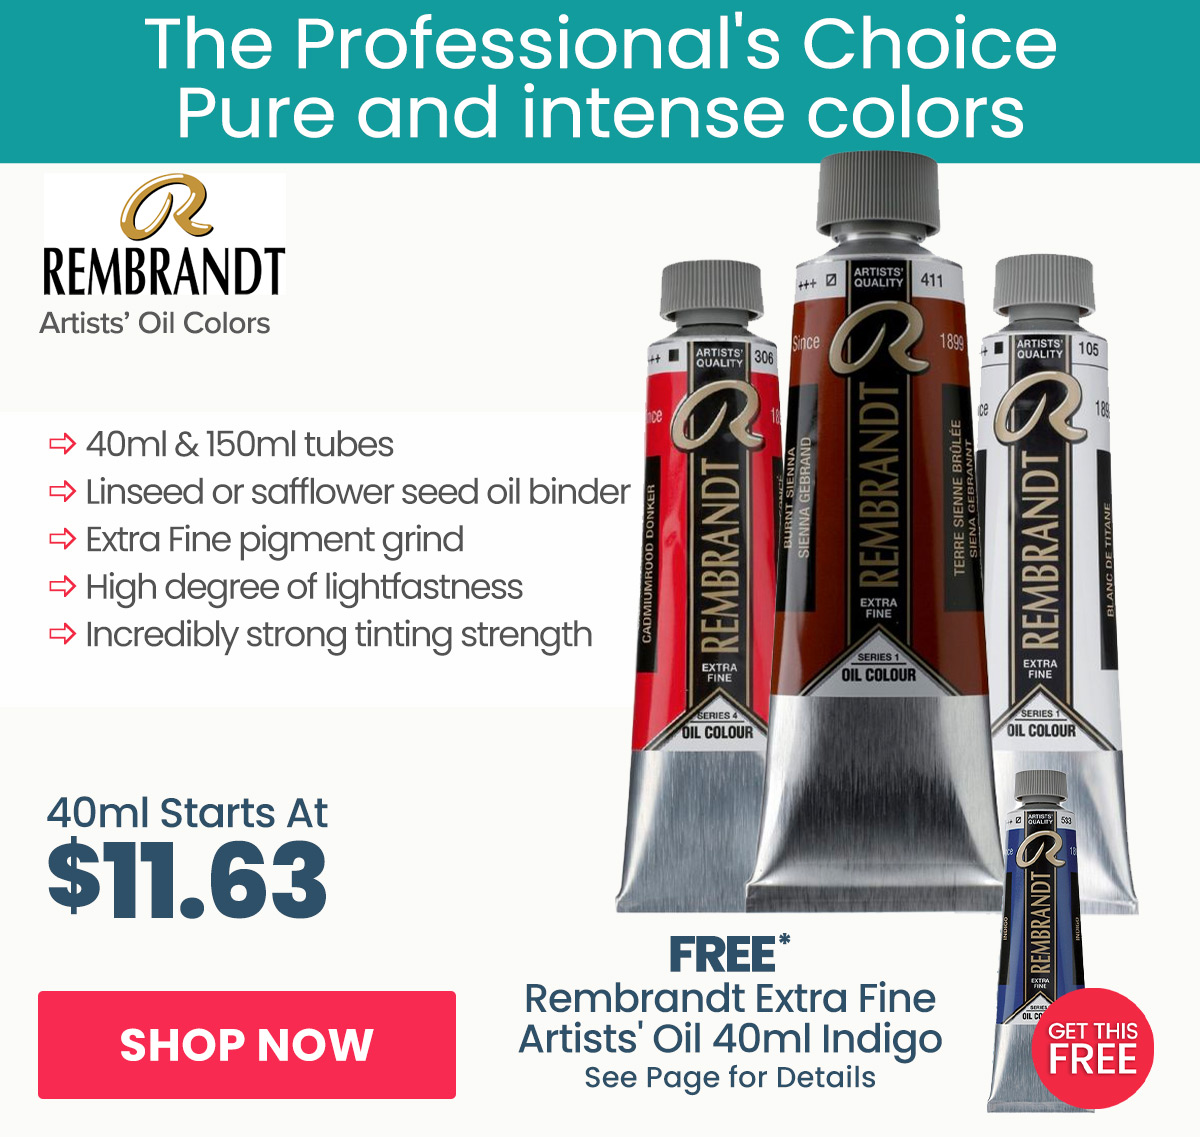 Free Gift with Purchase - Rembrandt Extra Fine Artists' Oil Paints